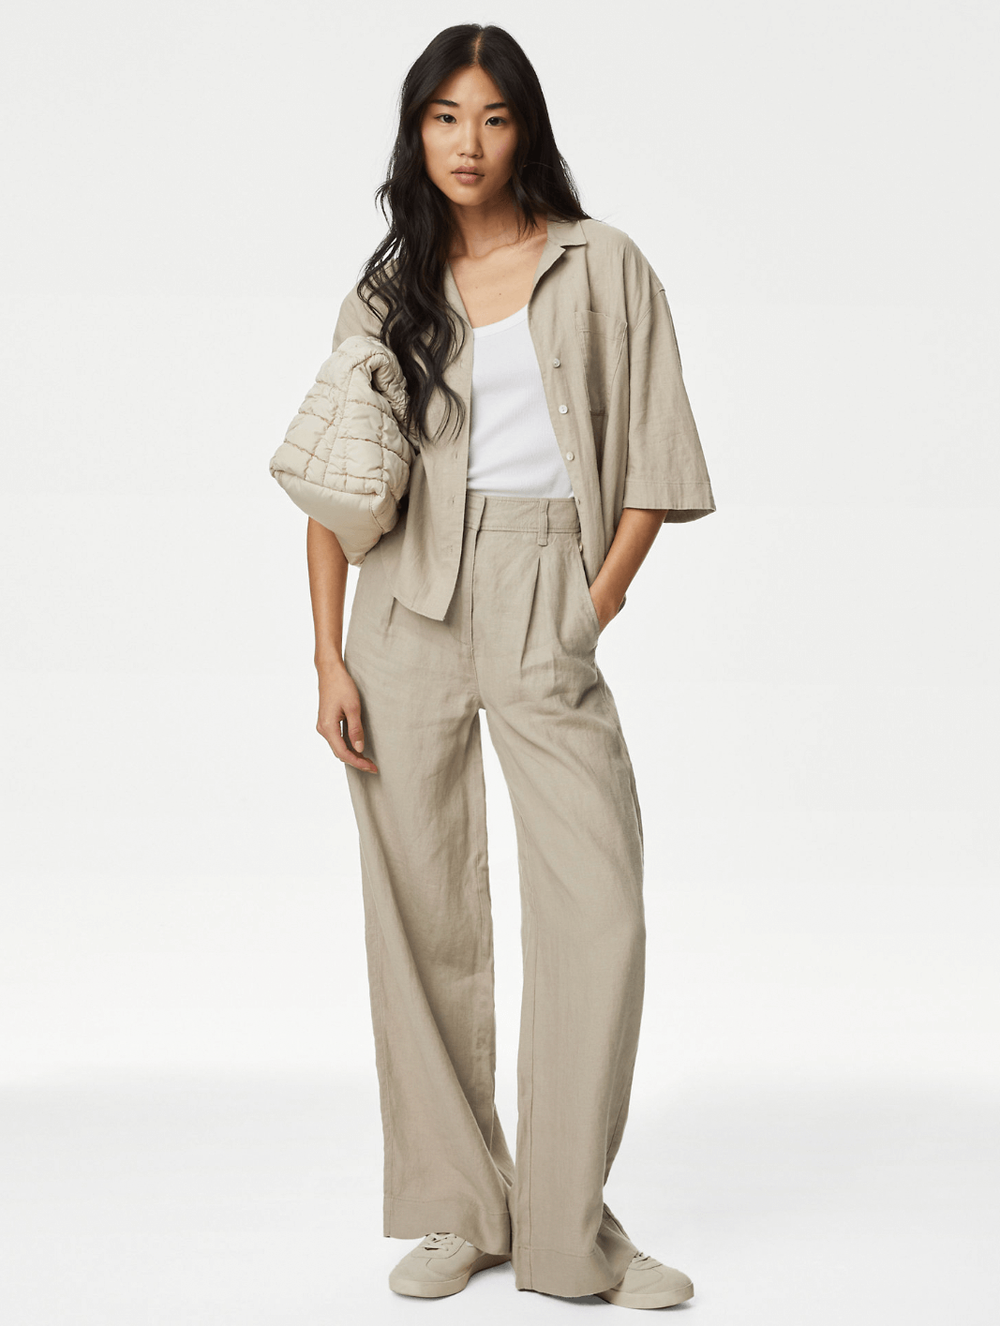 Marks and Spencer Petite Linen Trousers £39.50